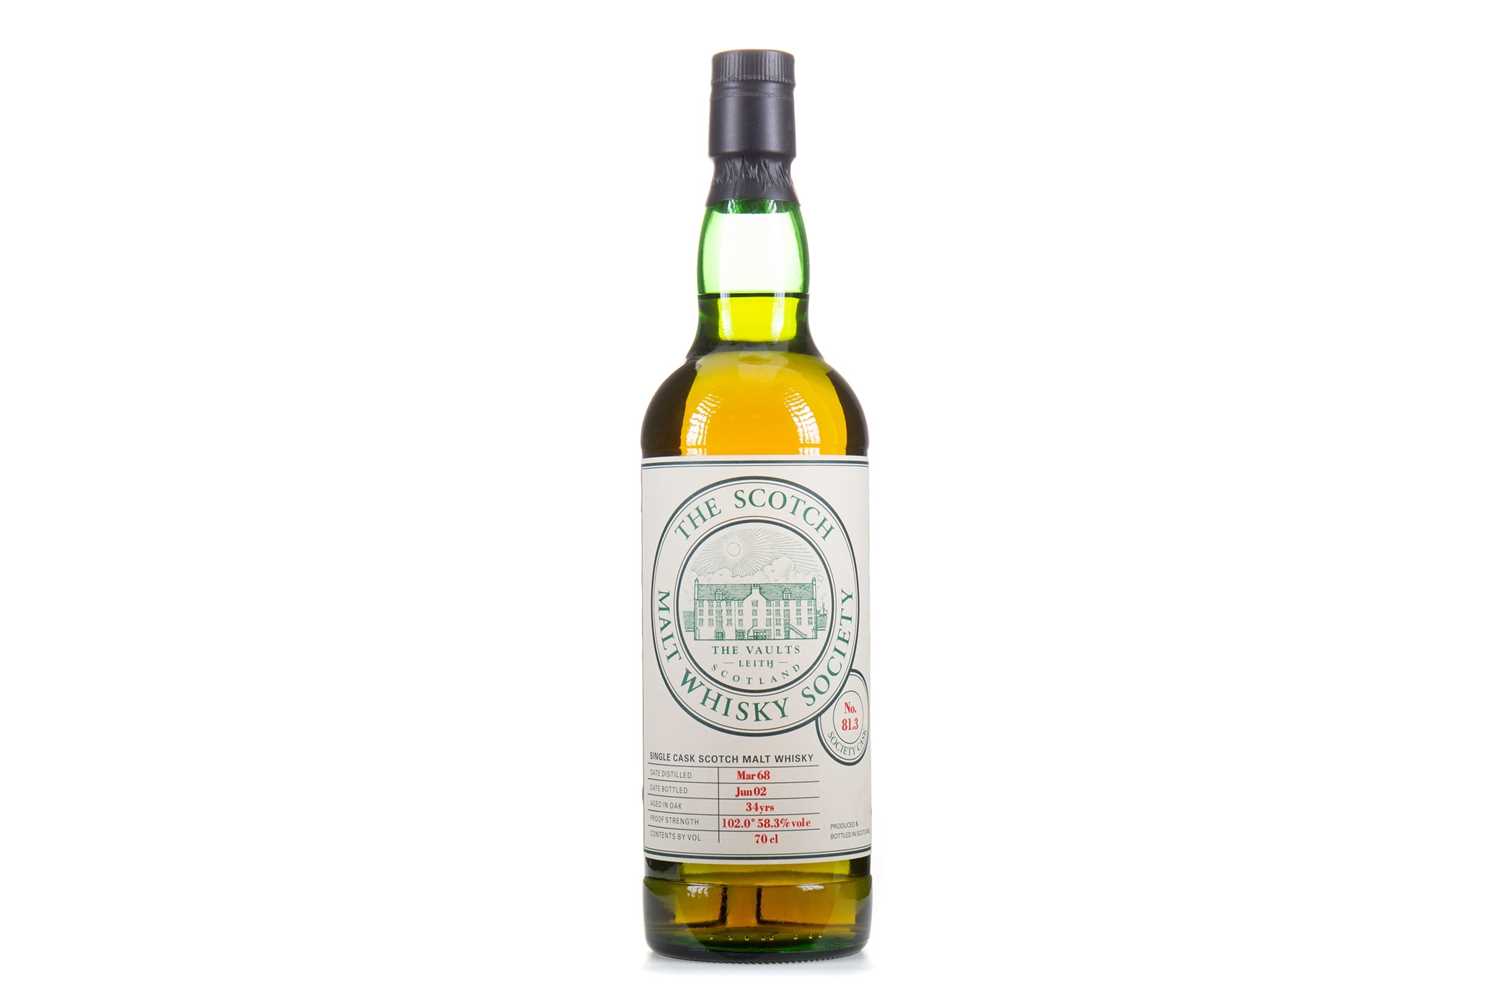 Lot 65 - SMWS 81.3 GLEN KEITH 1968 34 YEAR OLD